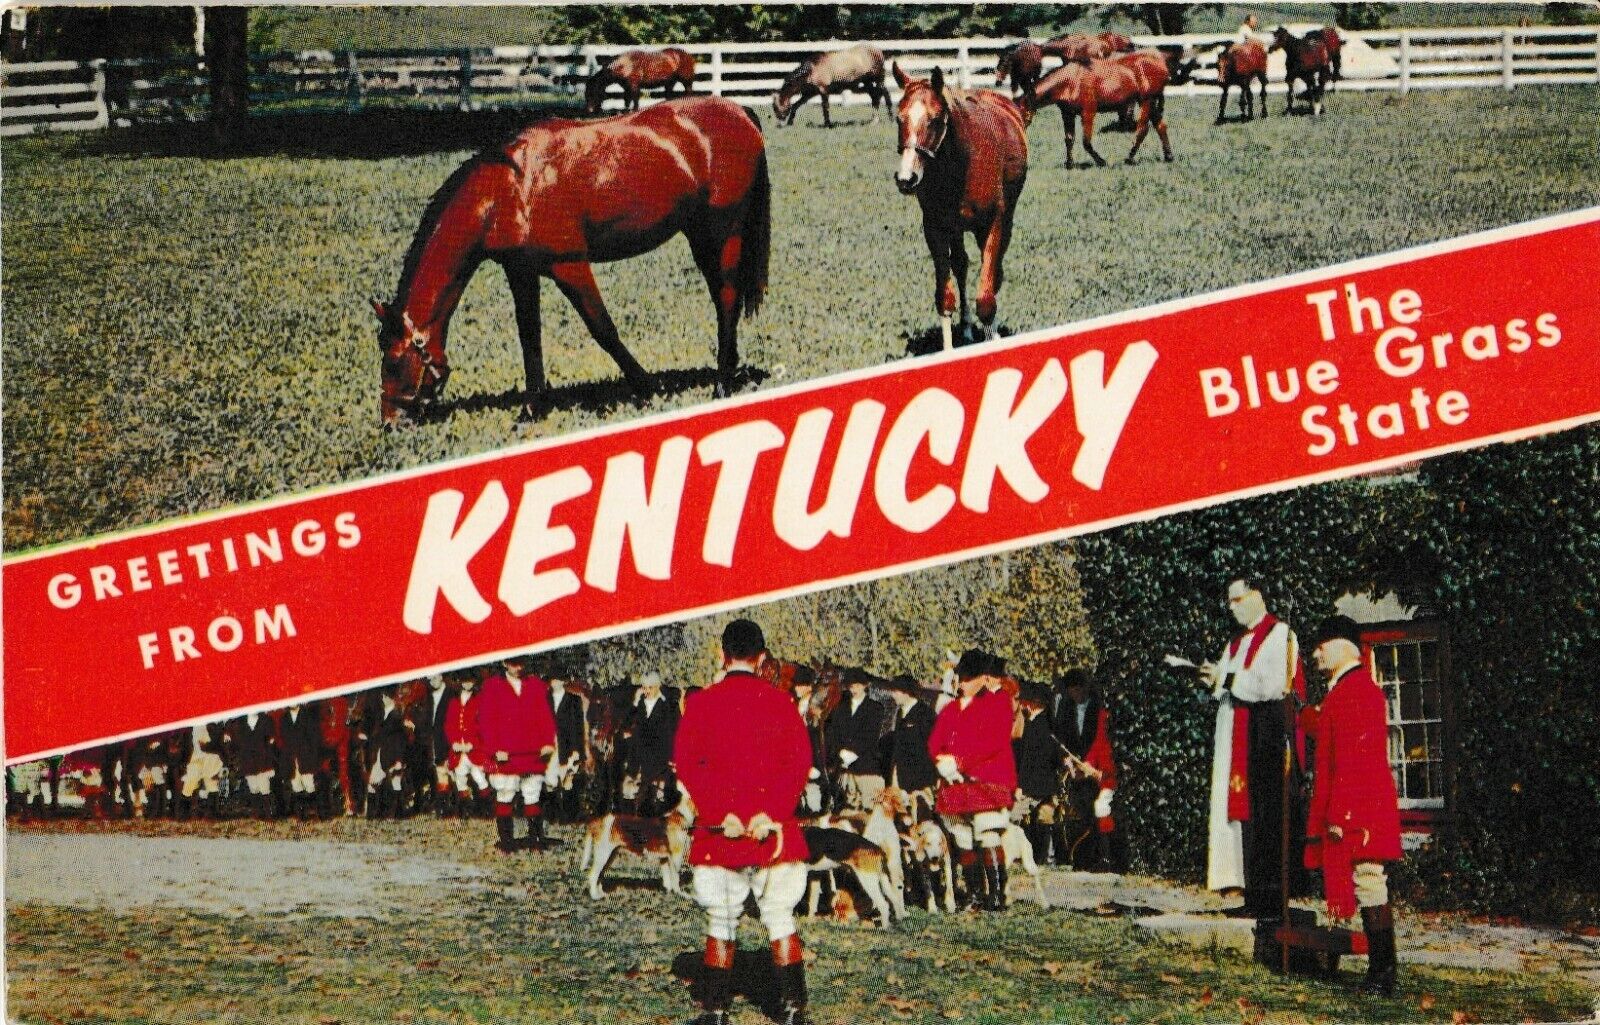 Greetings From Kentucky The Blue Grass State Thoroughbred Horses Postcard